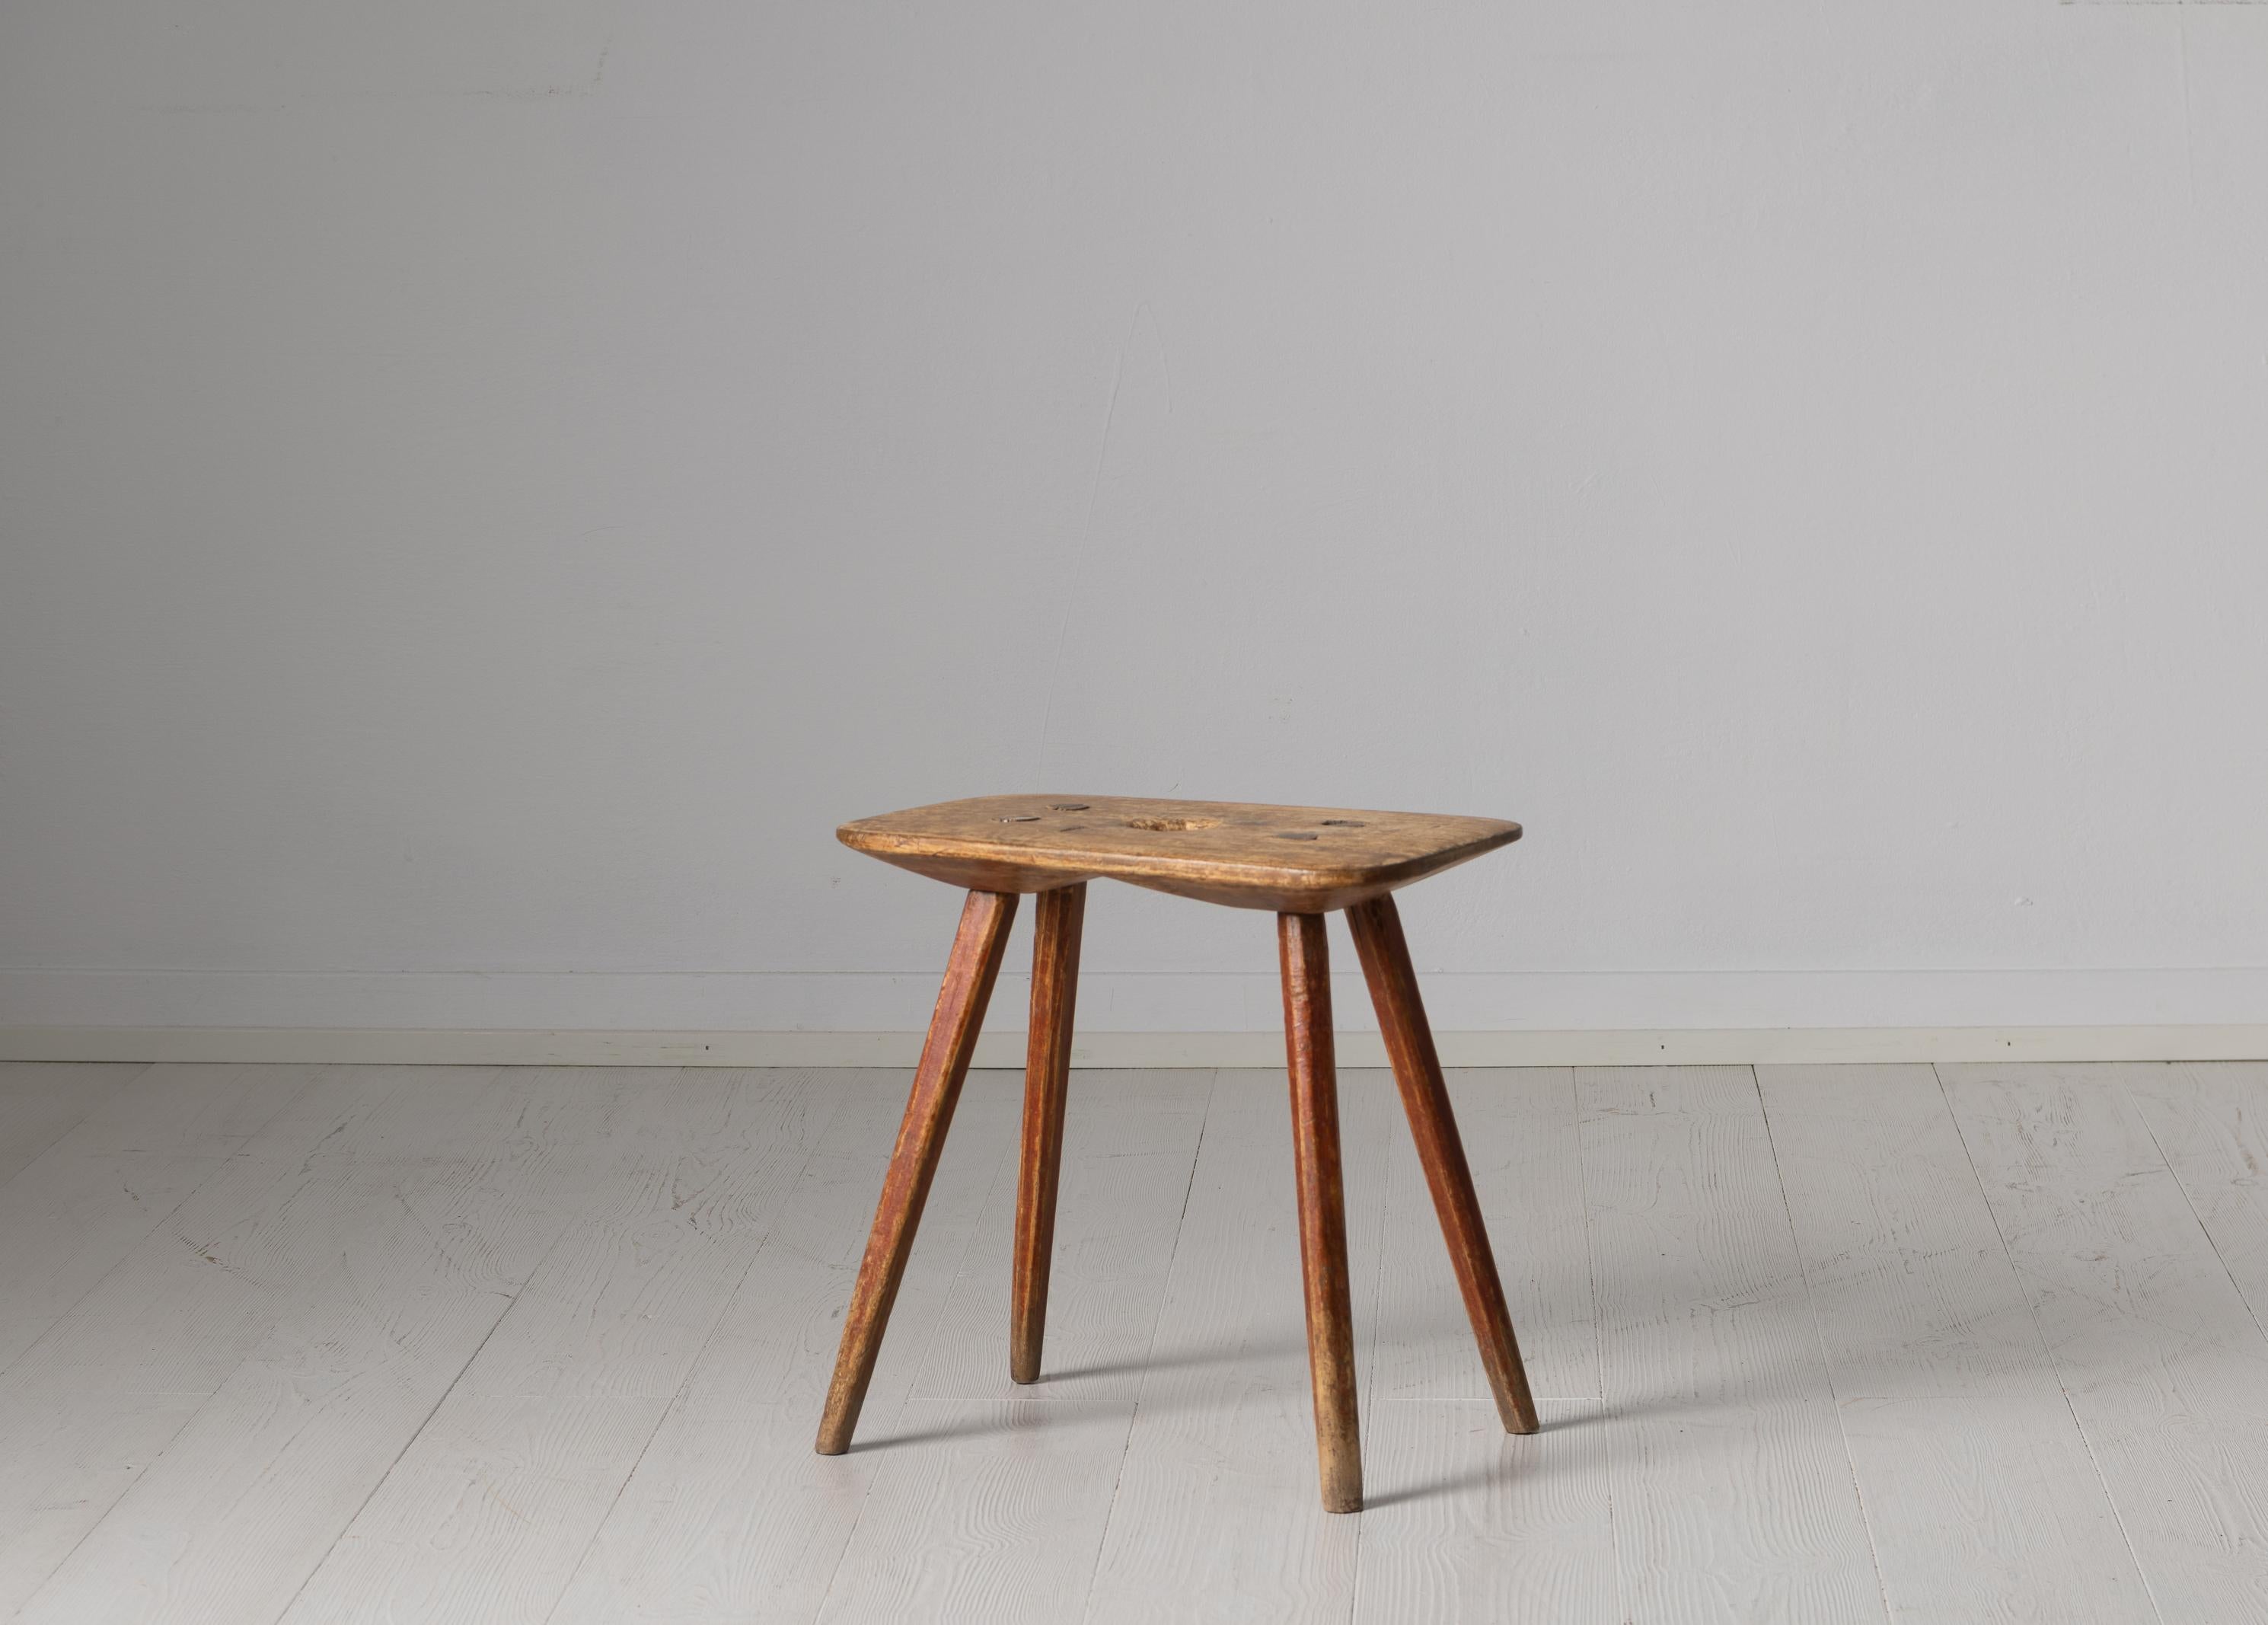 Northern Swedish charming folk art stool from the early 19th century. The stool is made in pine and it has the original worn patina of time. The model and construction is primitive but the stool has some smaller details like the profiled edges on